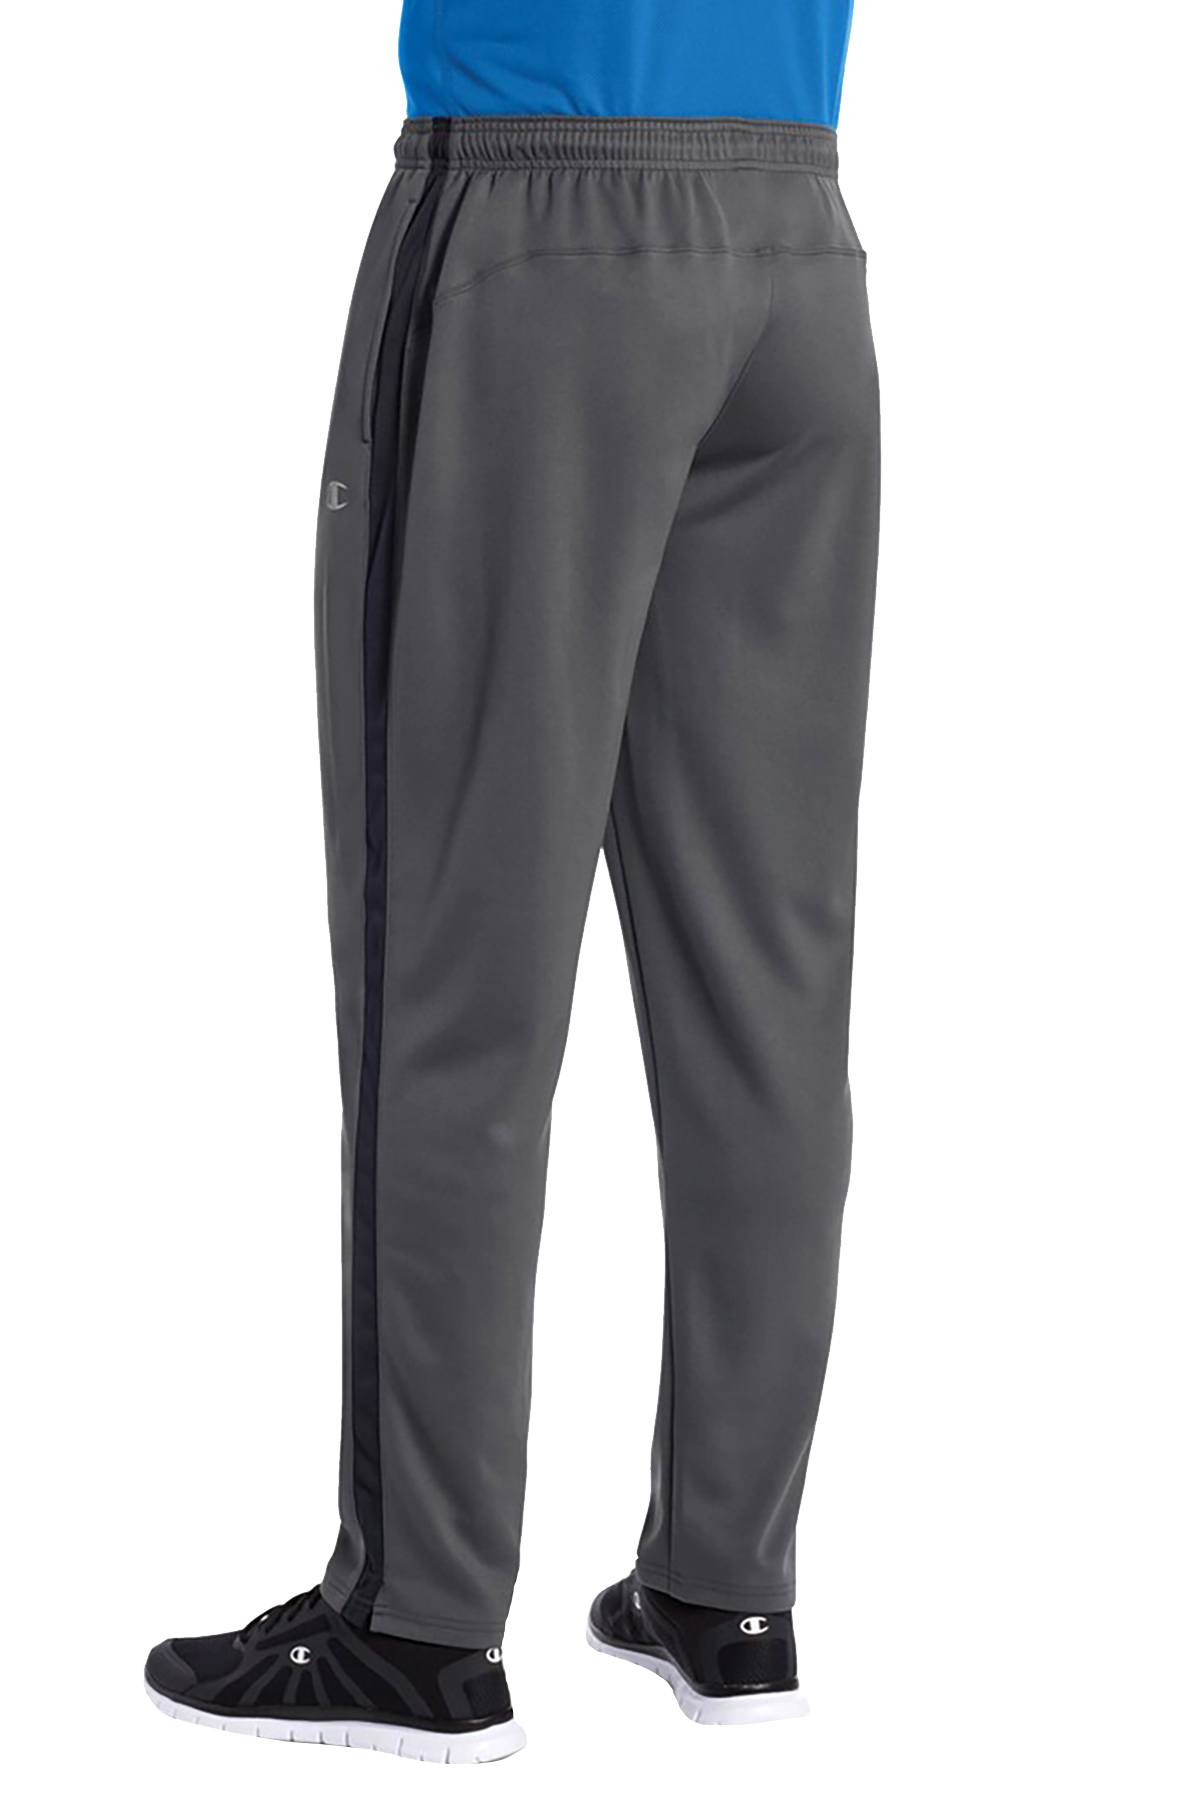 Champion Stealth-Grey/Black Woven Track Pant